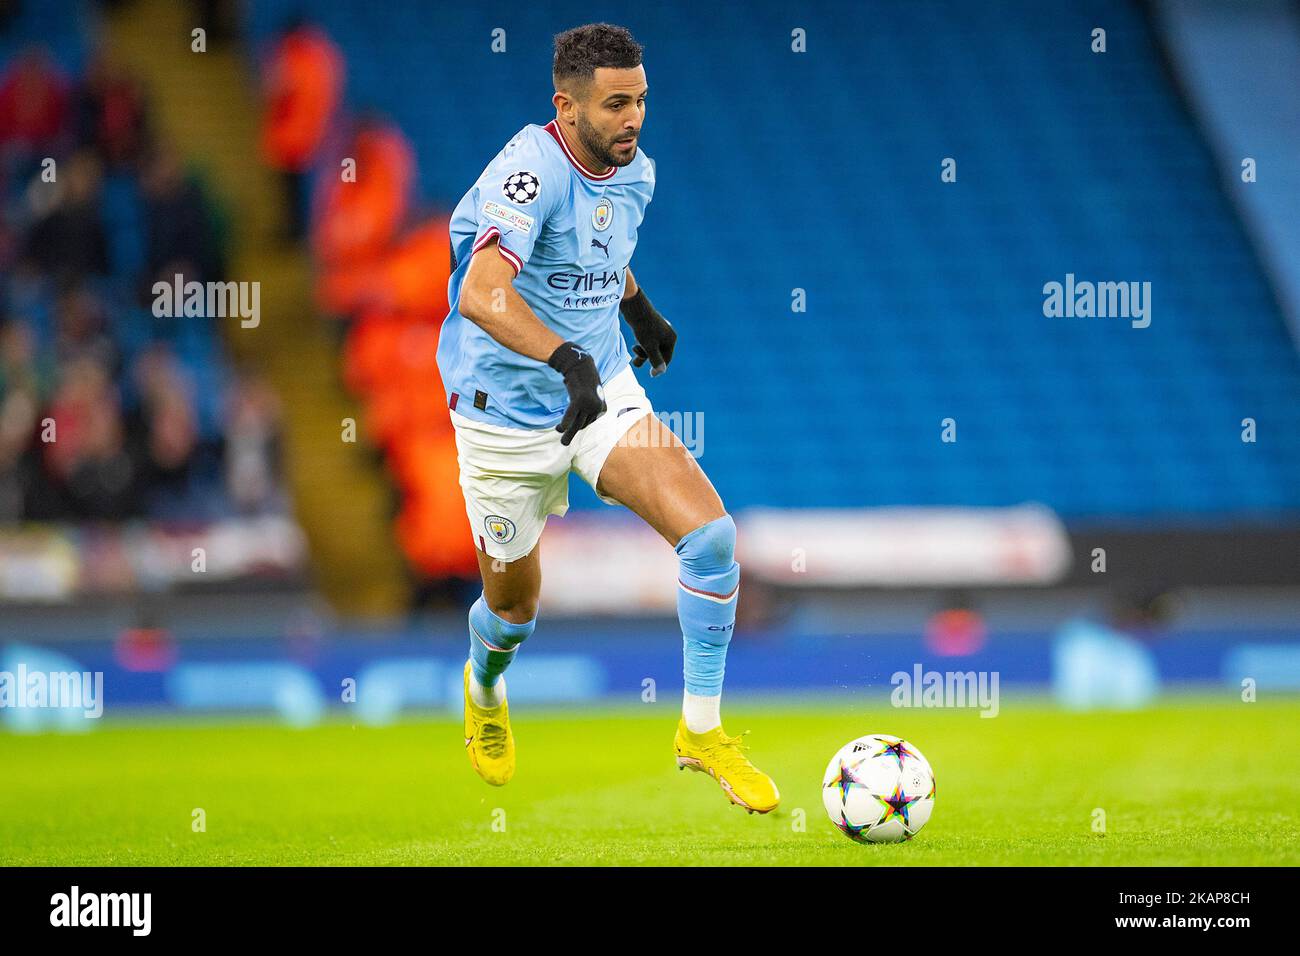 Manchester, UK. 2nd November, 2022.  Riyad Mahrez (26)of Manchester City during the UEFA Champions League Group G match between Manchester City and Sevilla FC at the Etihad Stadium, Manchester on Wednesday 2nd November 2022. (Credit: Mike Morese | MI News) Credit: MI News & Sport /Alamy Live News Stock Photo